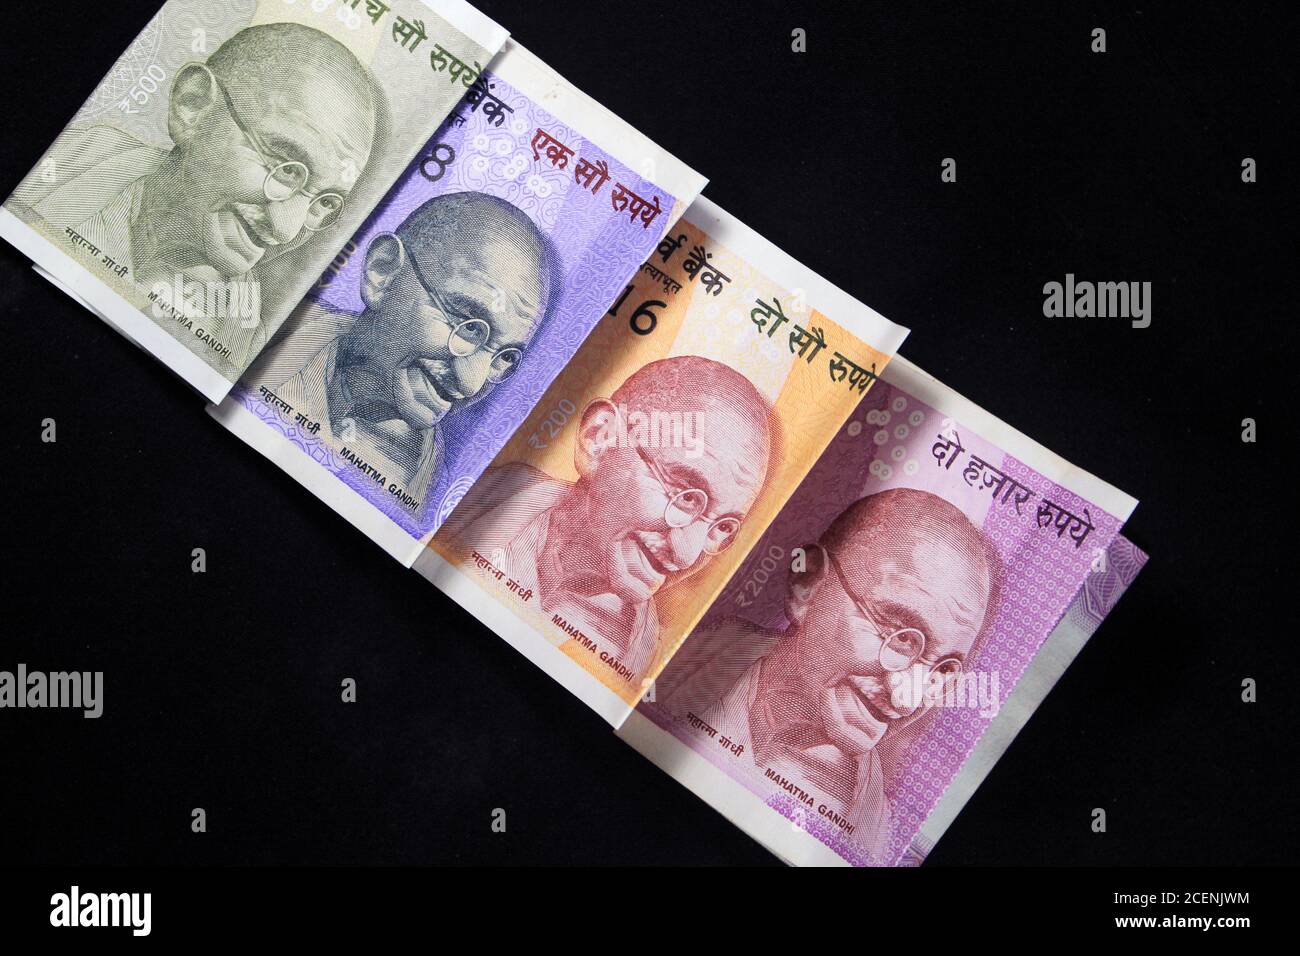 Indian currency. 100, 200, 500, and 2000 rupee note. Indian currency isolated on black background. Stock Photo